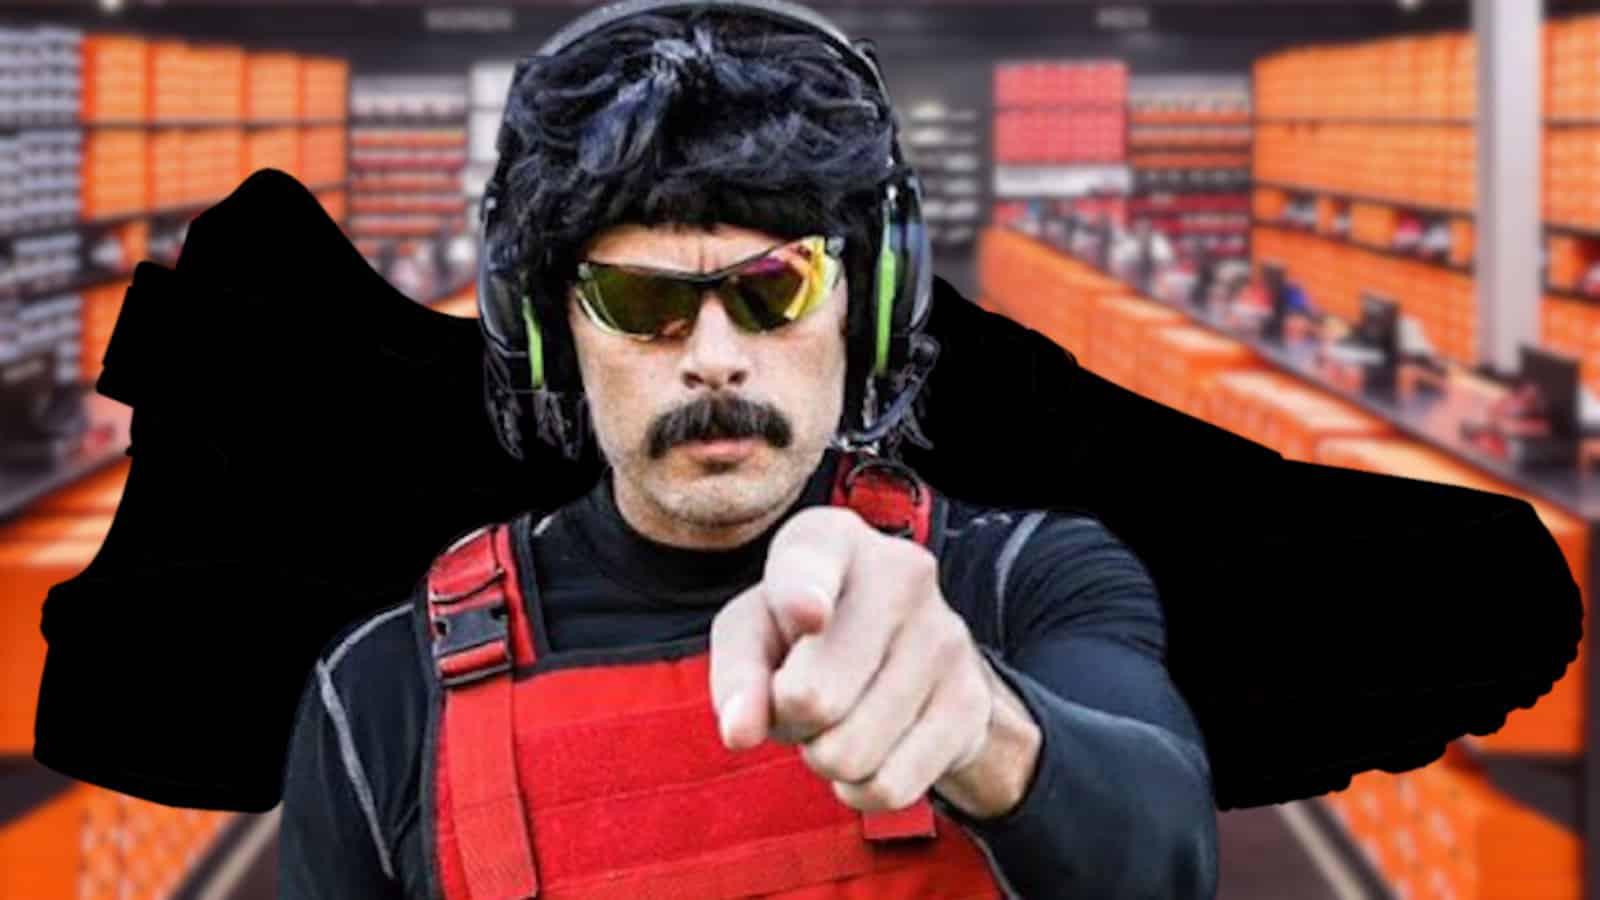 Dr Disrespect gaming shoes